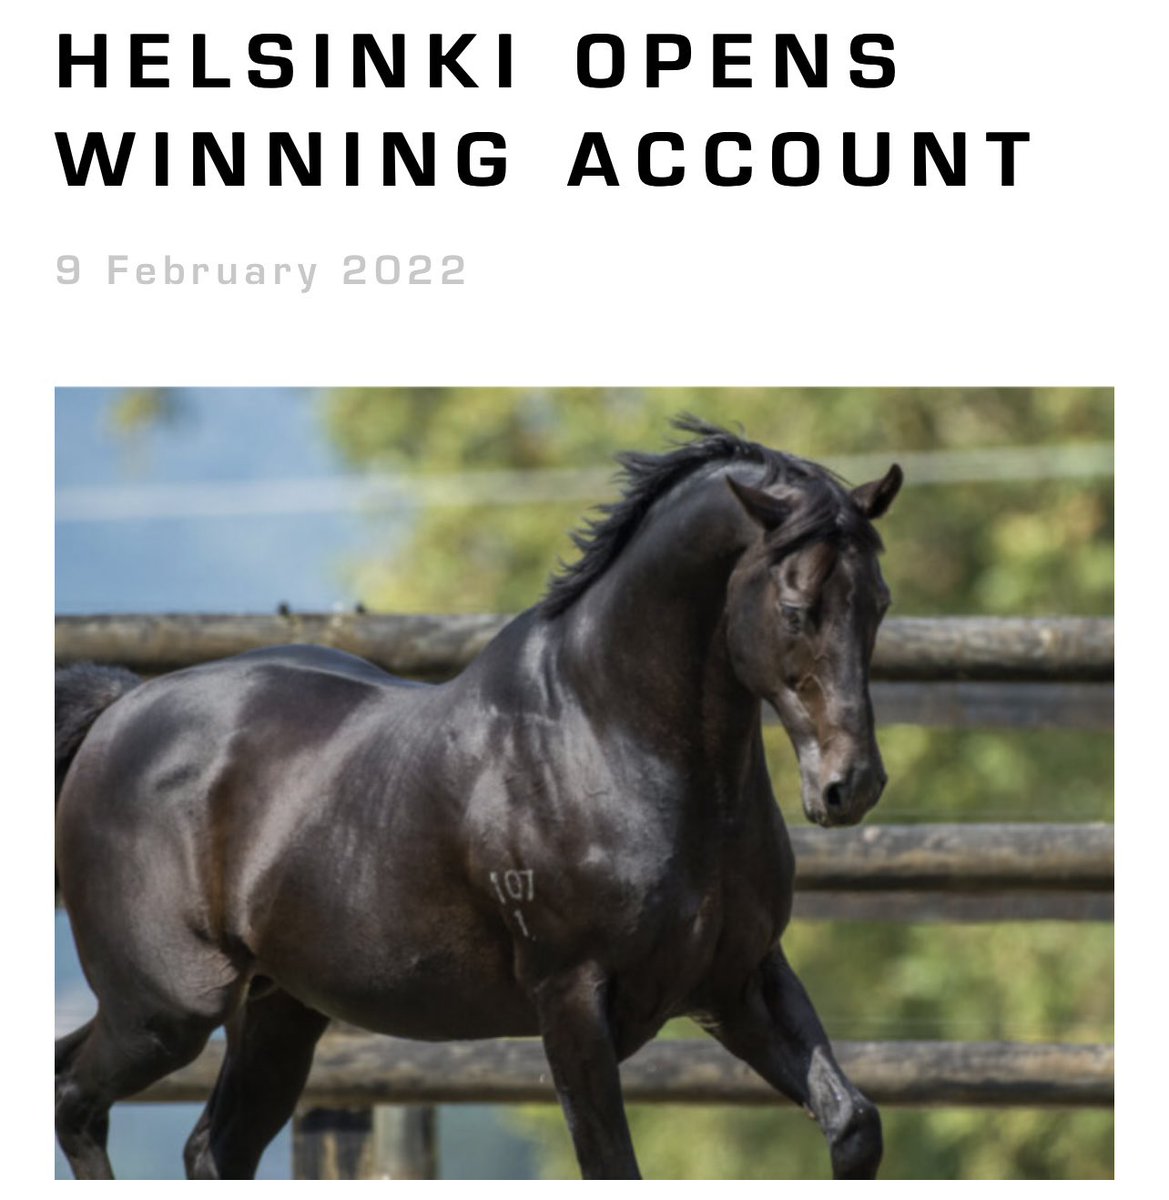 WS bred daughter of Savabeel, Helsinki produced a front-running performance at Ruakaka on Wednesday afternoon to open her winning account for trainers Peter and Dawn Williams.

Read more: https://t.co/hA0OtG3z2C https://t.co/cyJBd4cvlH